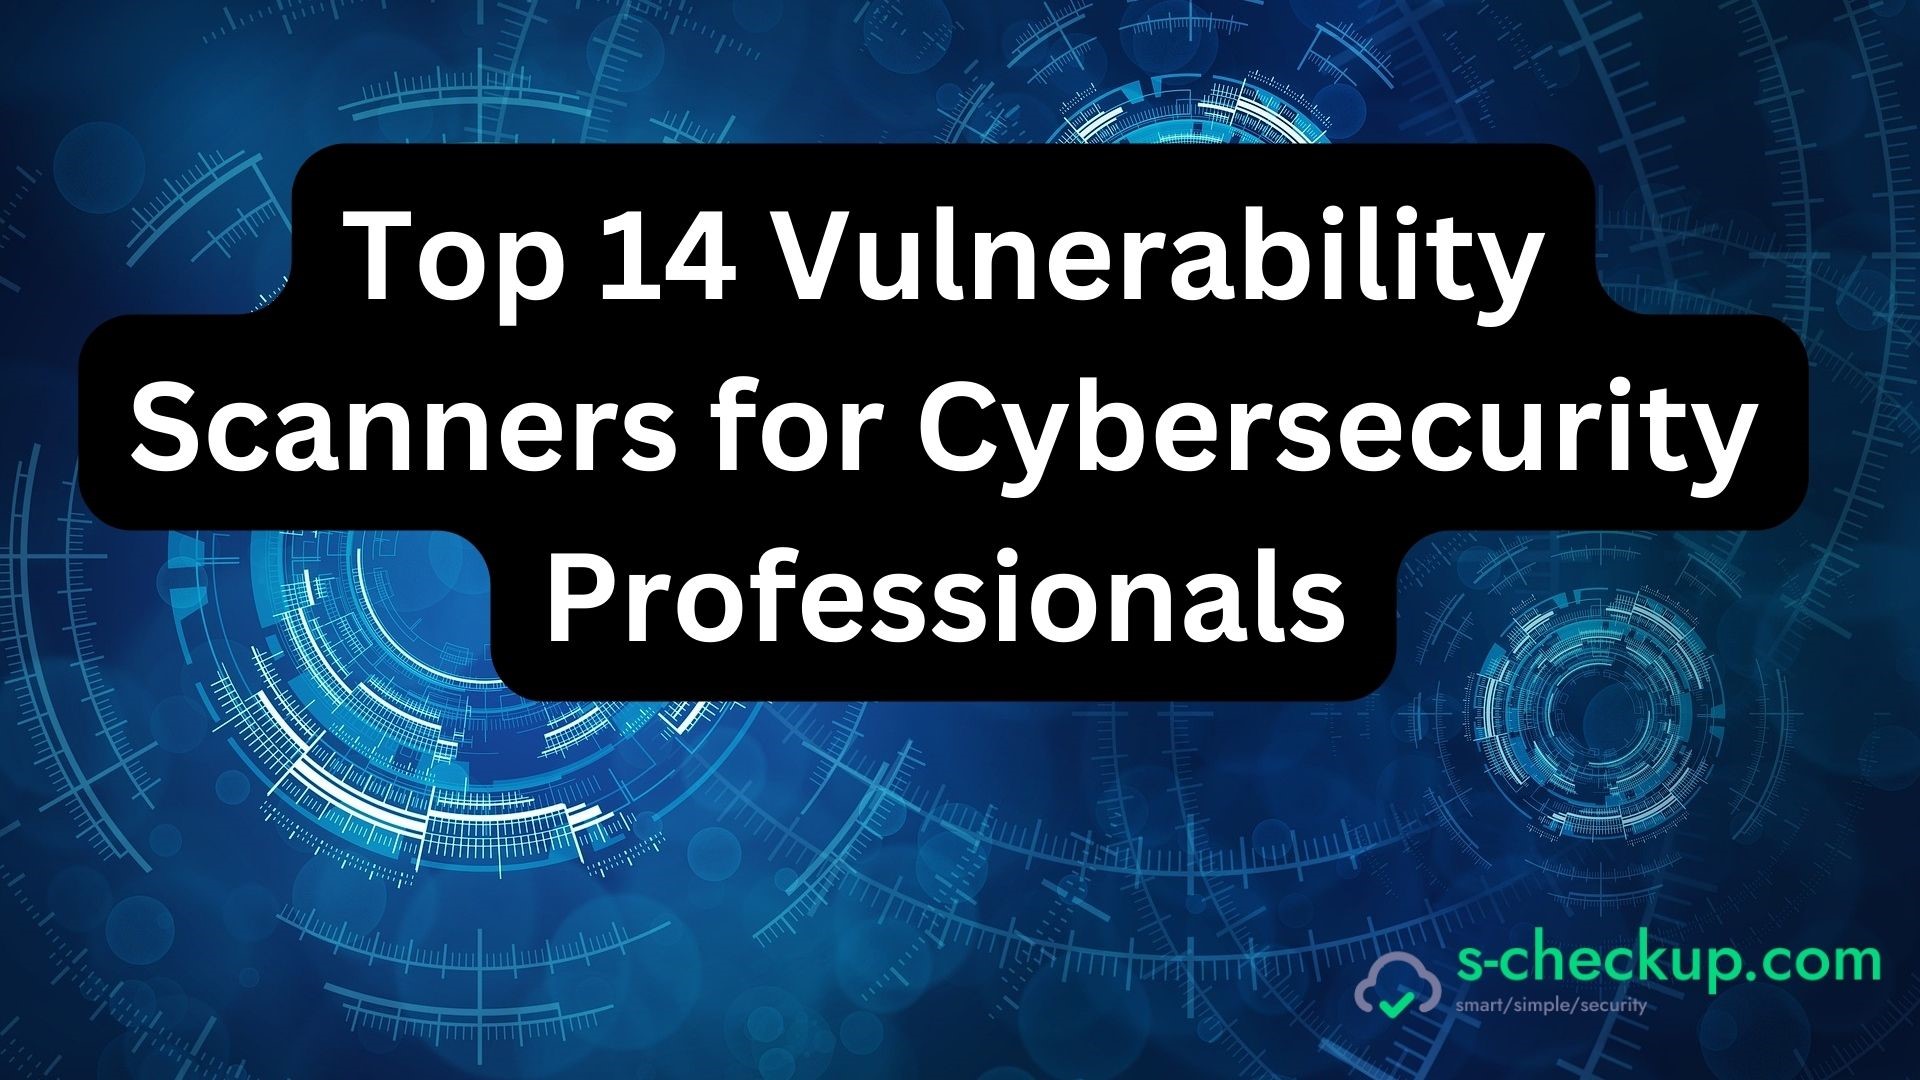 Top 14 Vulnerability Scanners for Cybersecurity Professionals